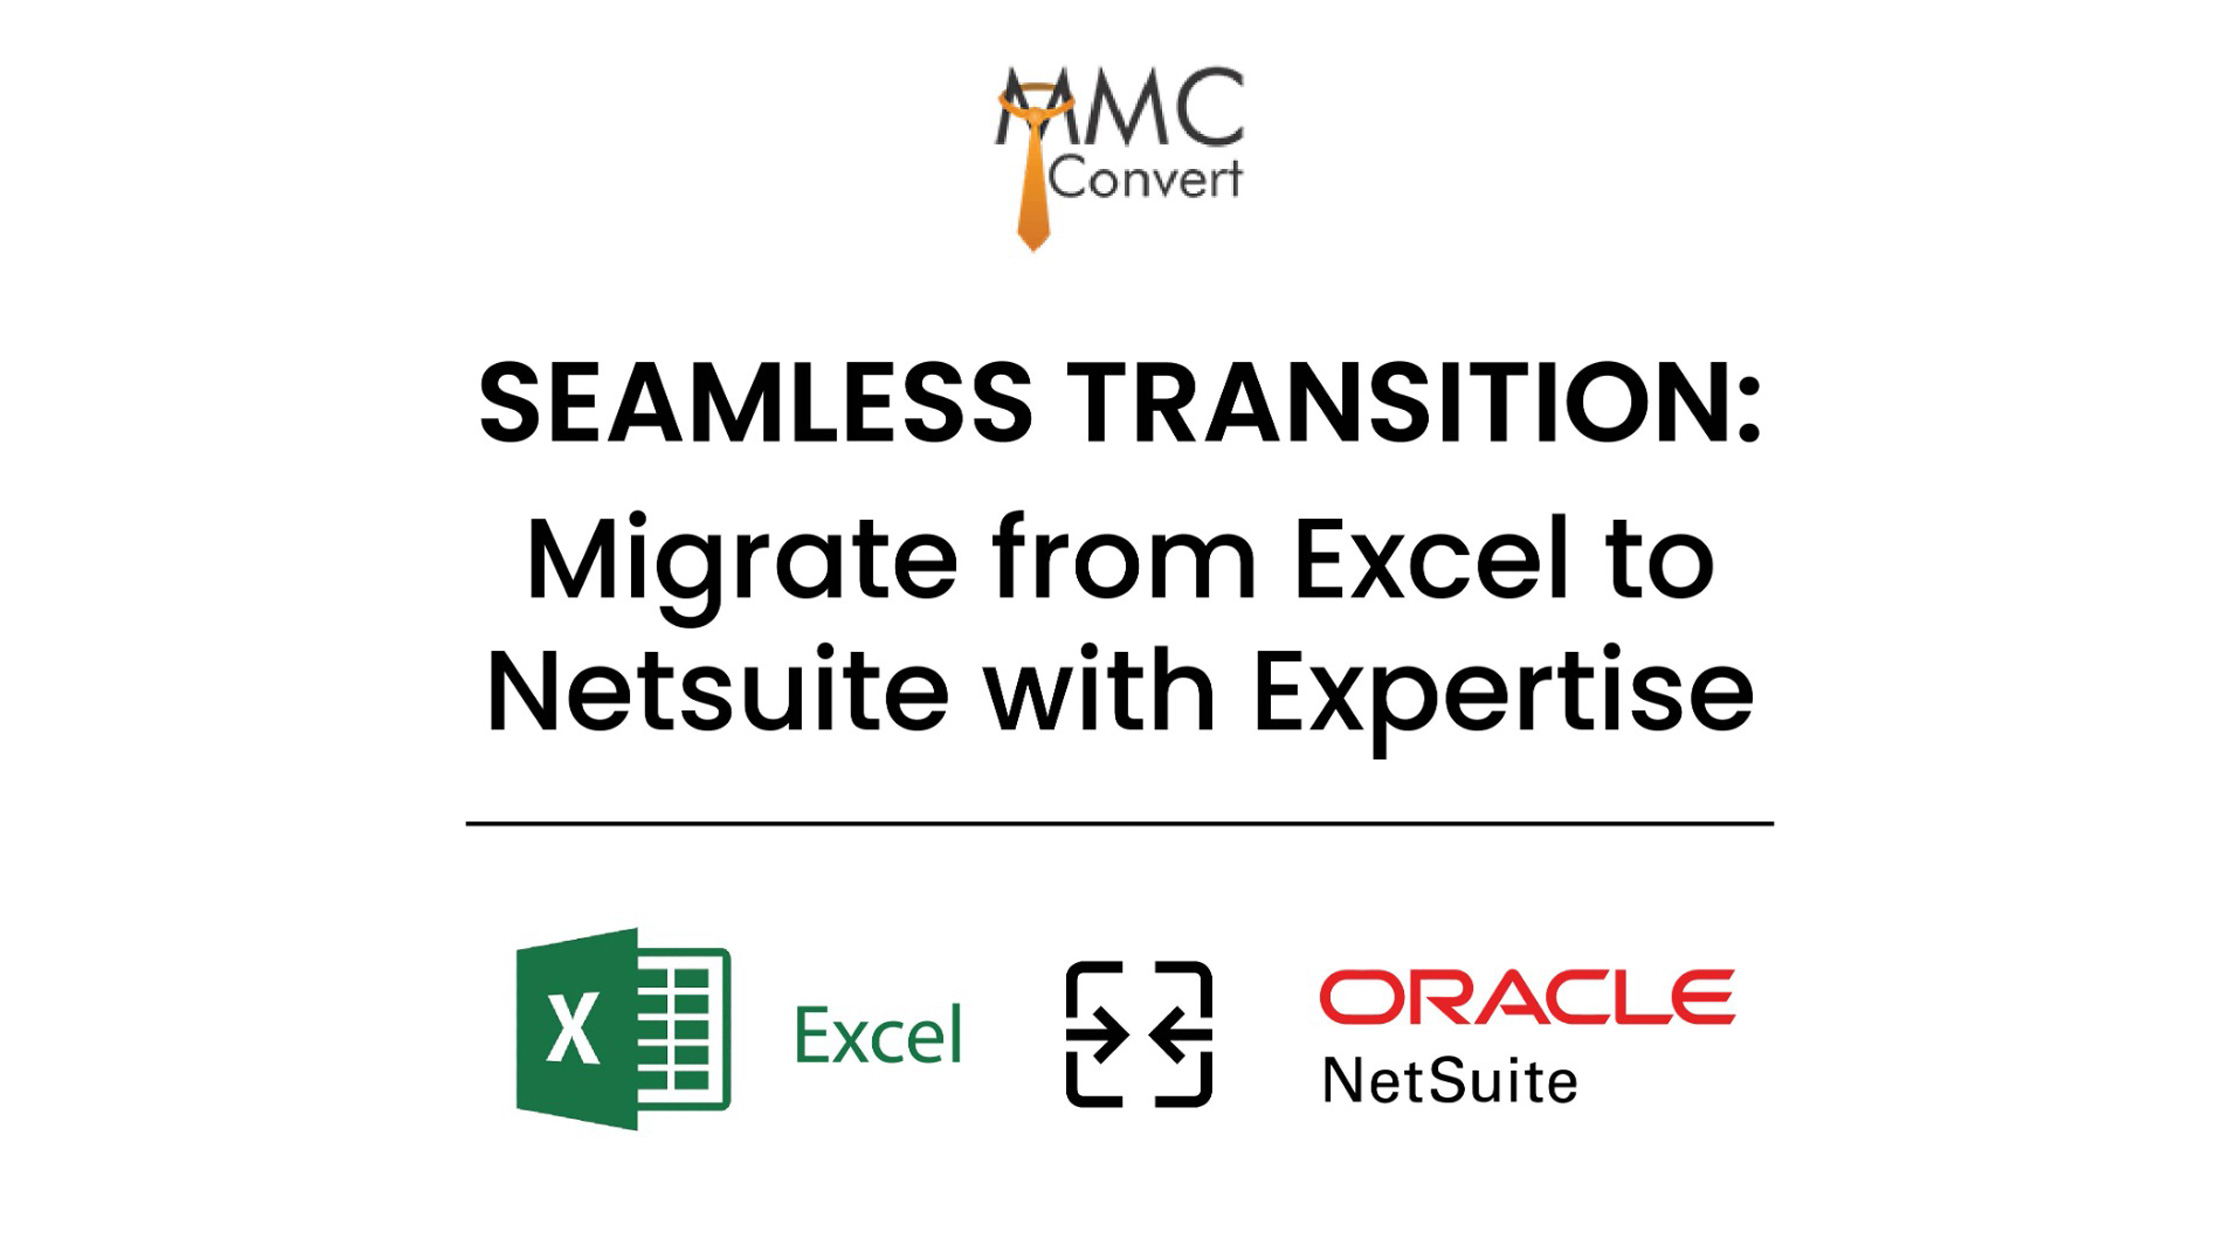 Seamless Transition: Migrate from Excel to Netsuite with Expertise